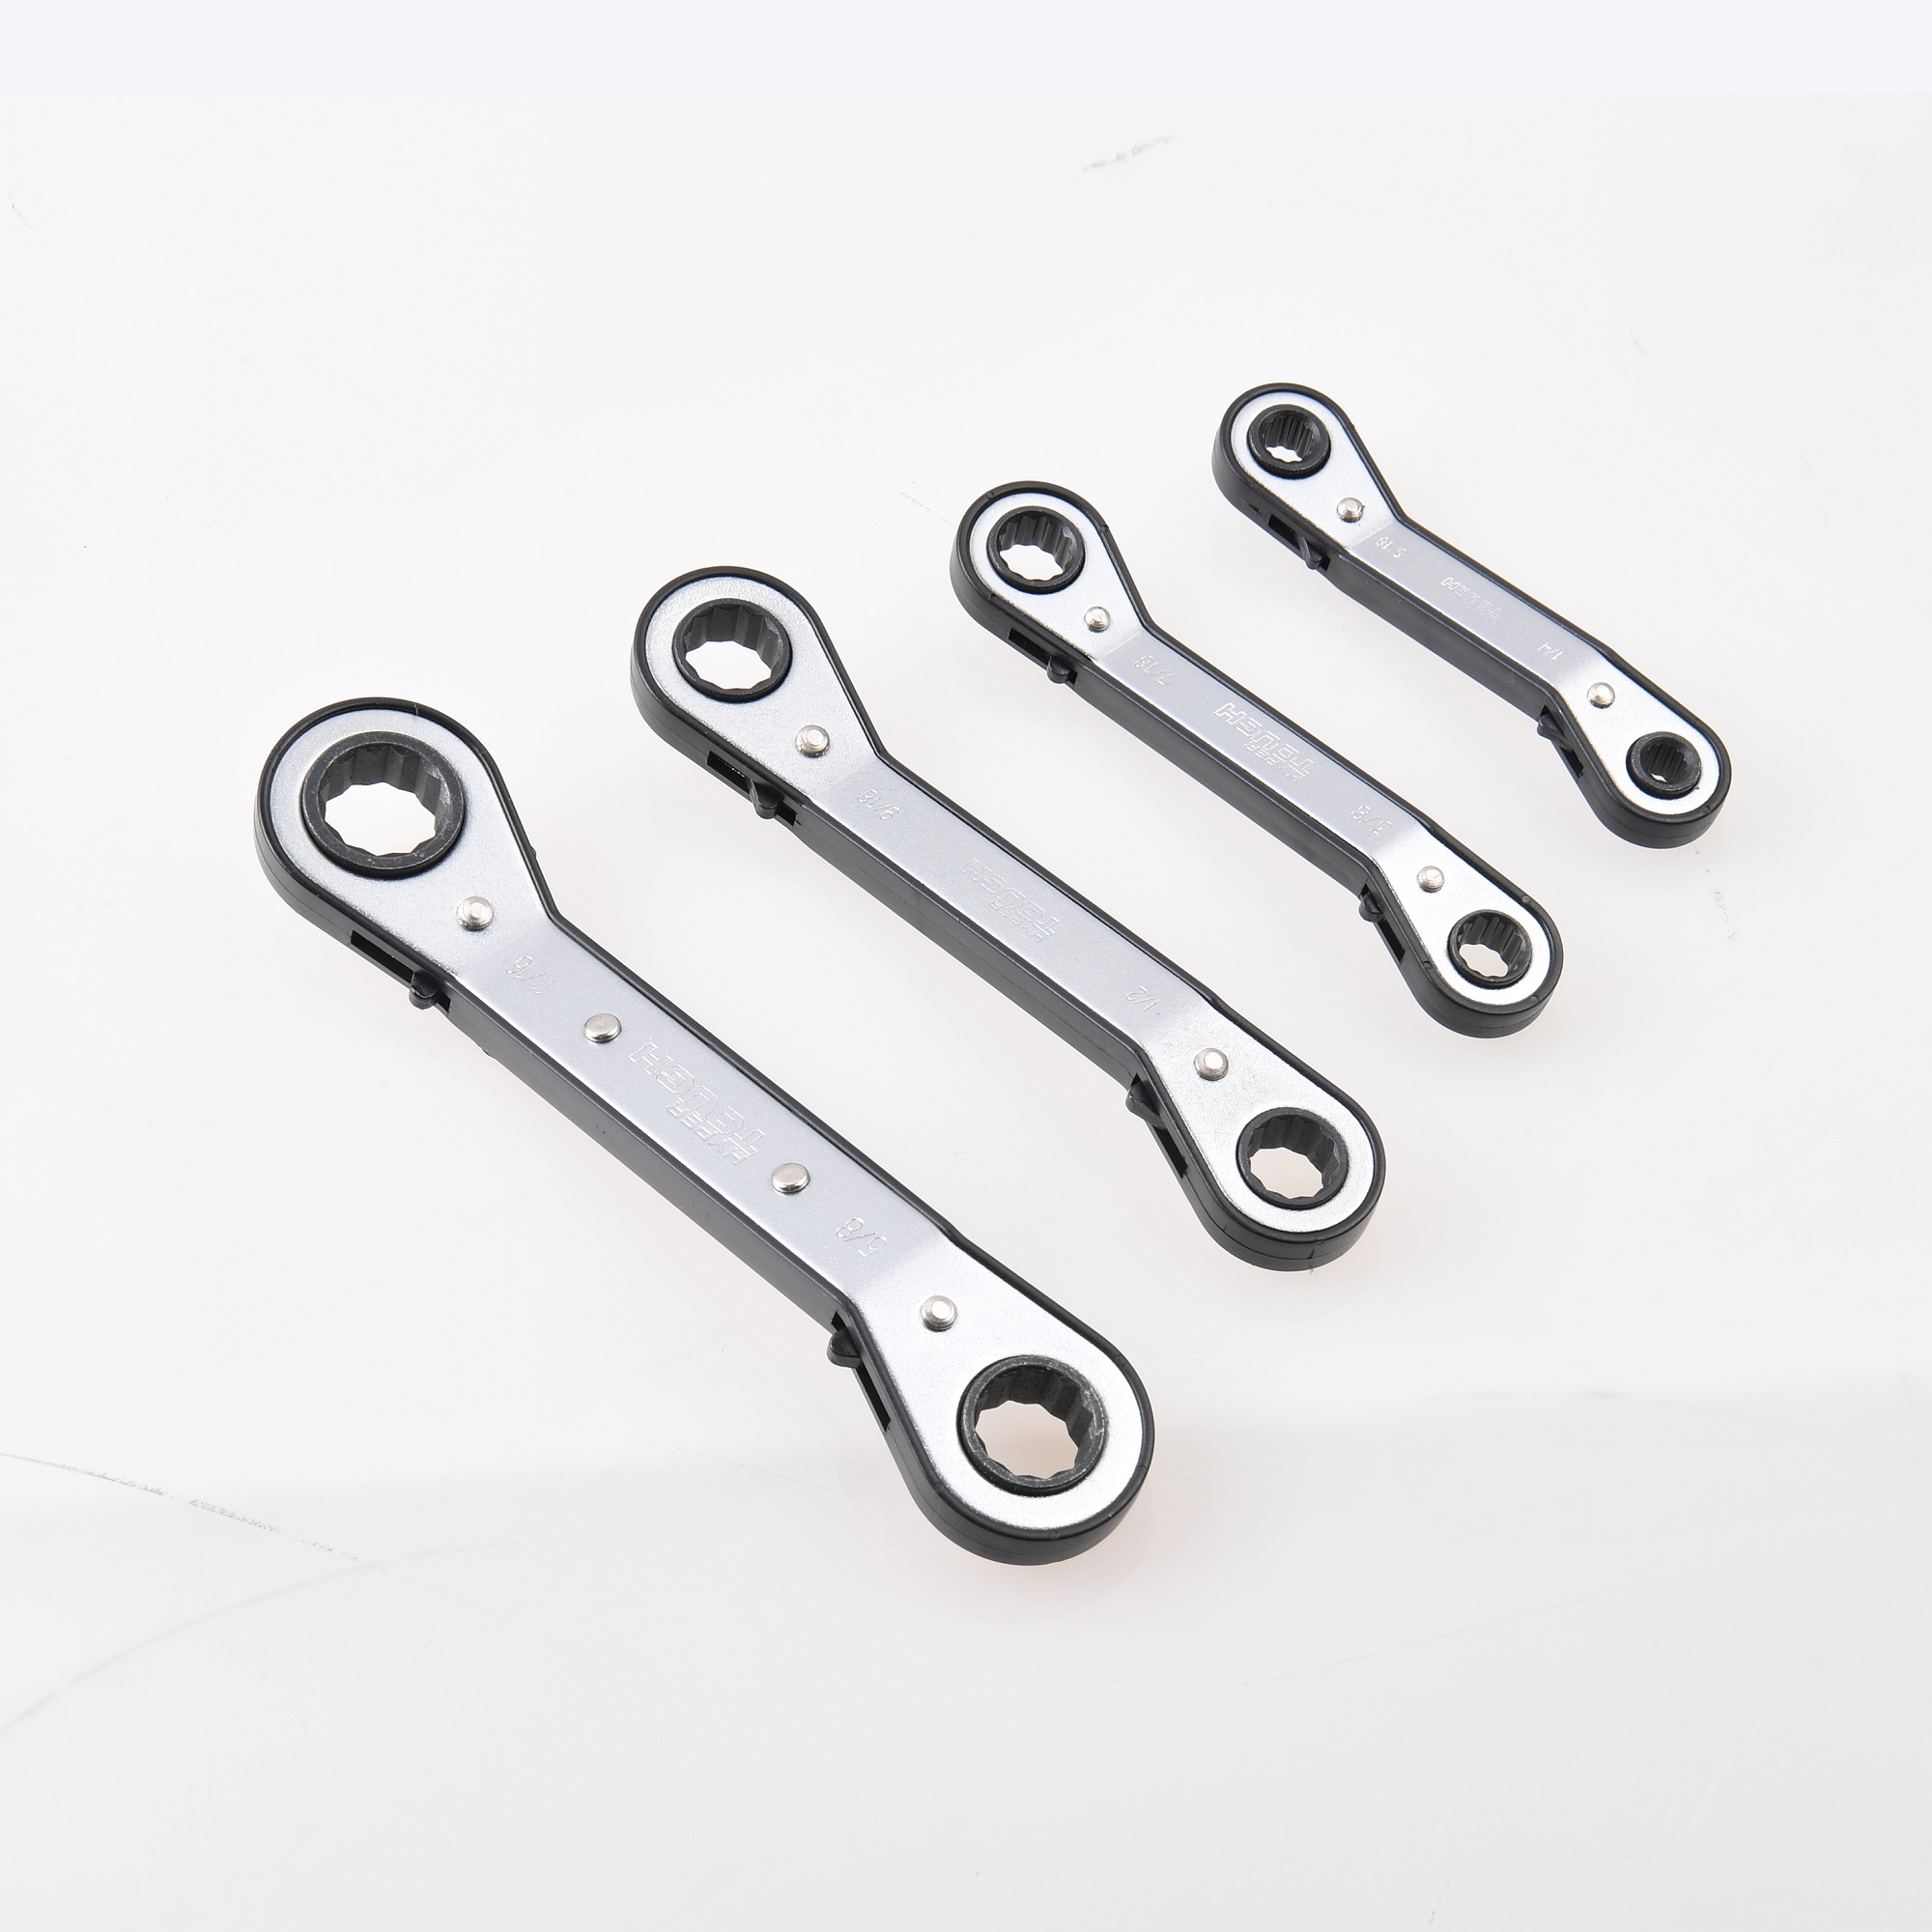 Hyper Tough Heavy-Duty 4-Piece SAE Ratchet Wrench Set - image 4 of 9